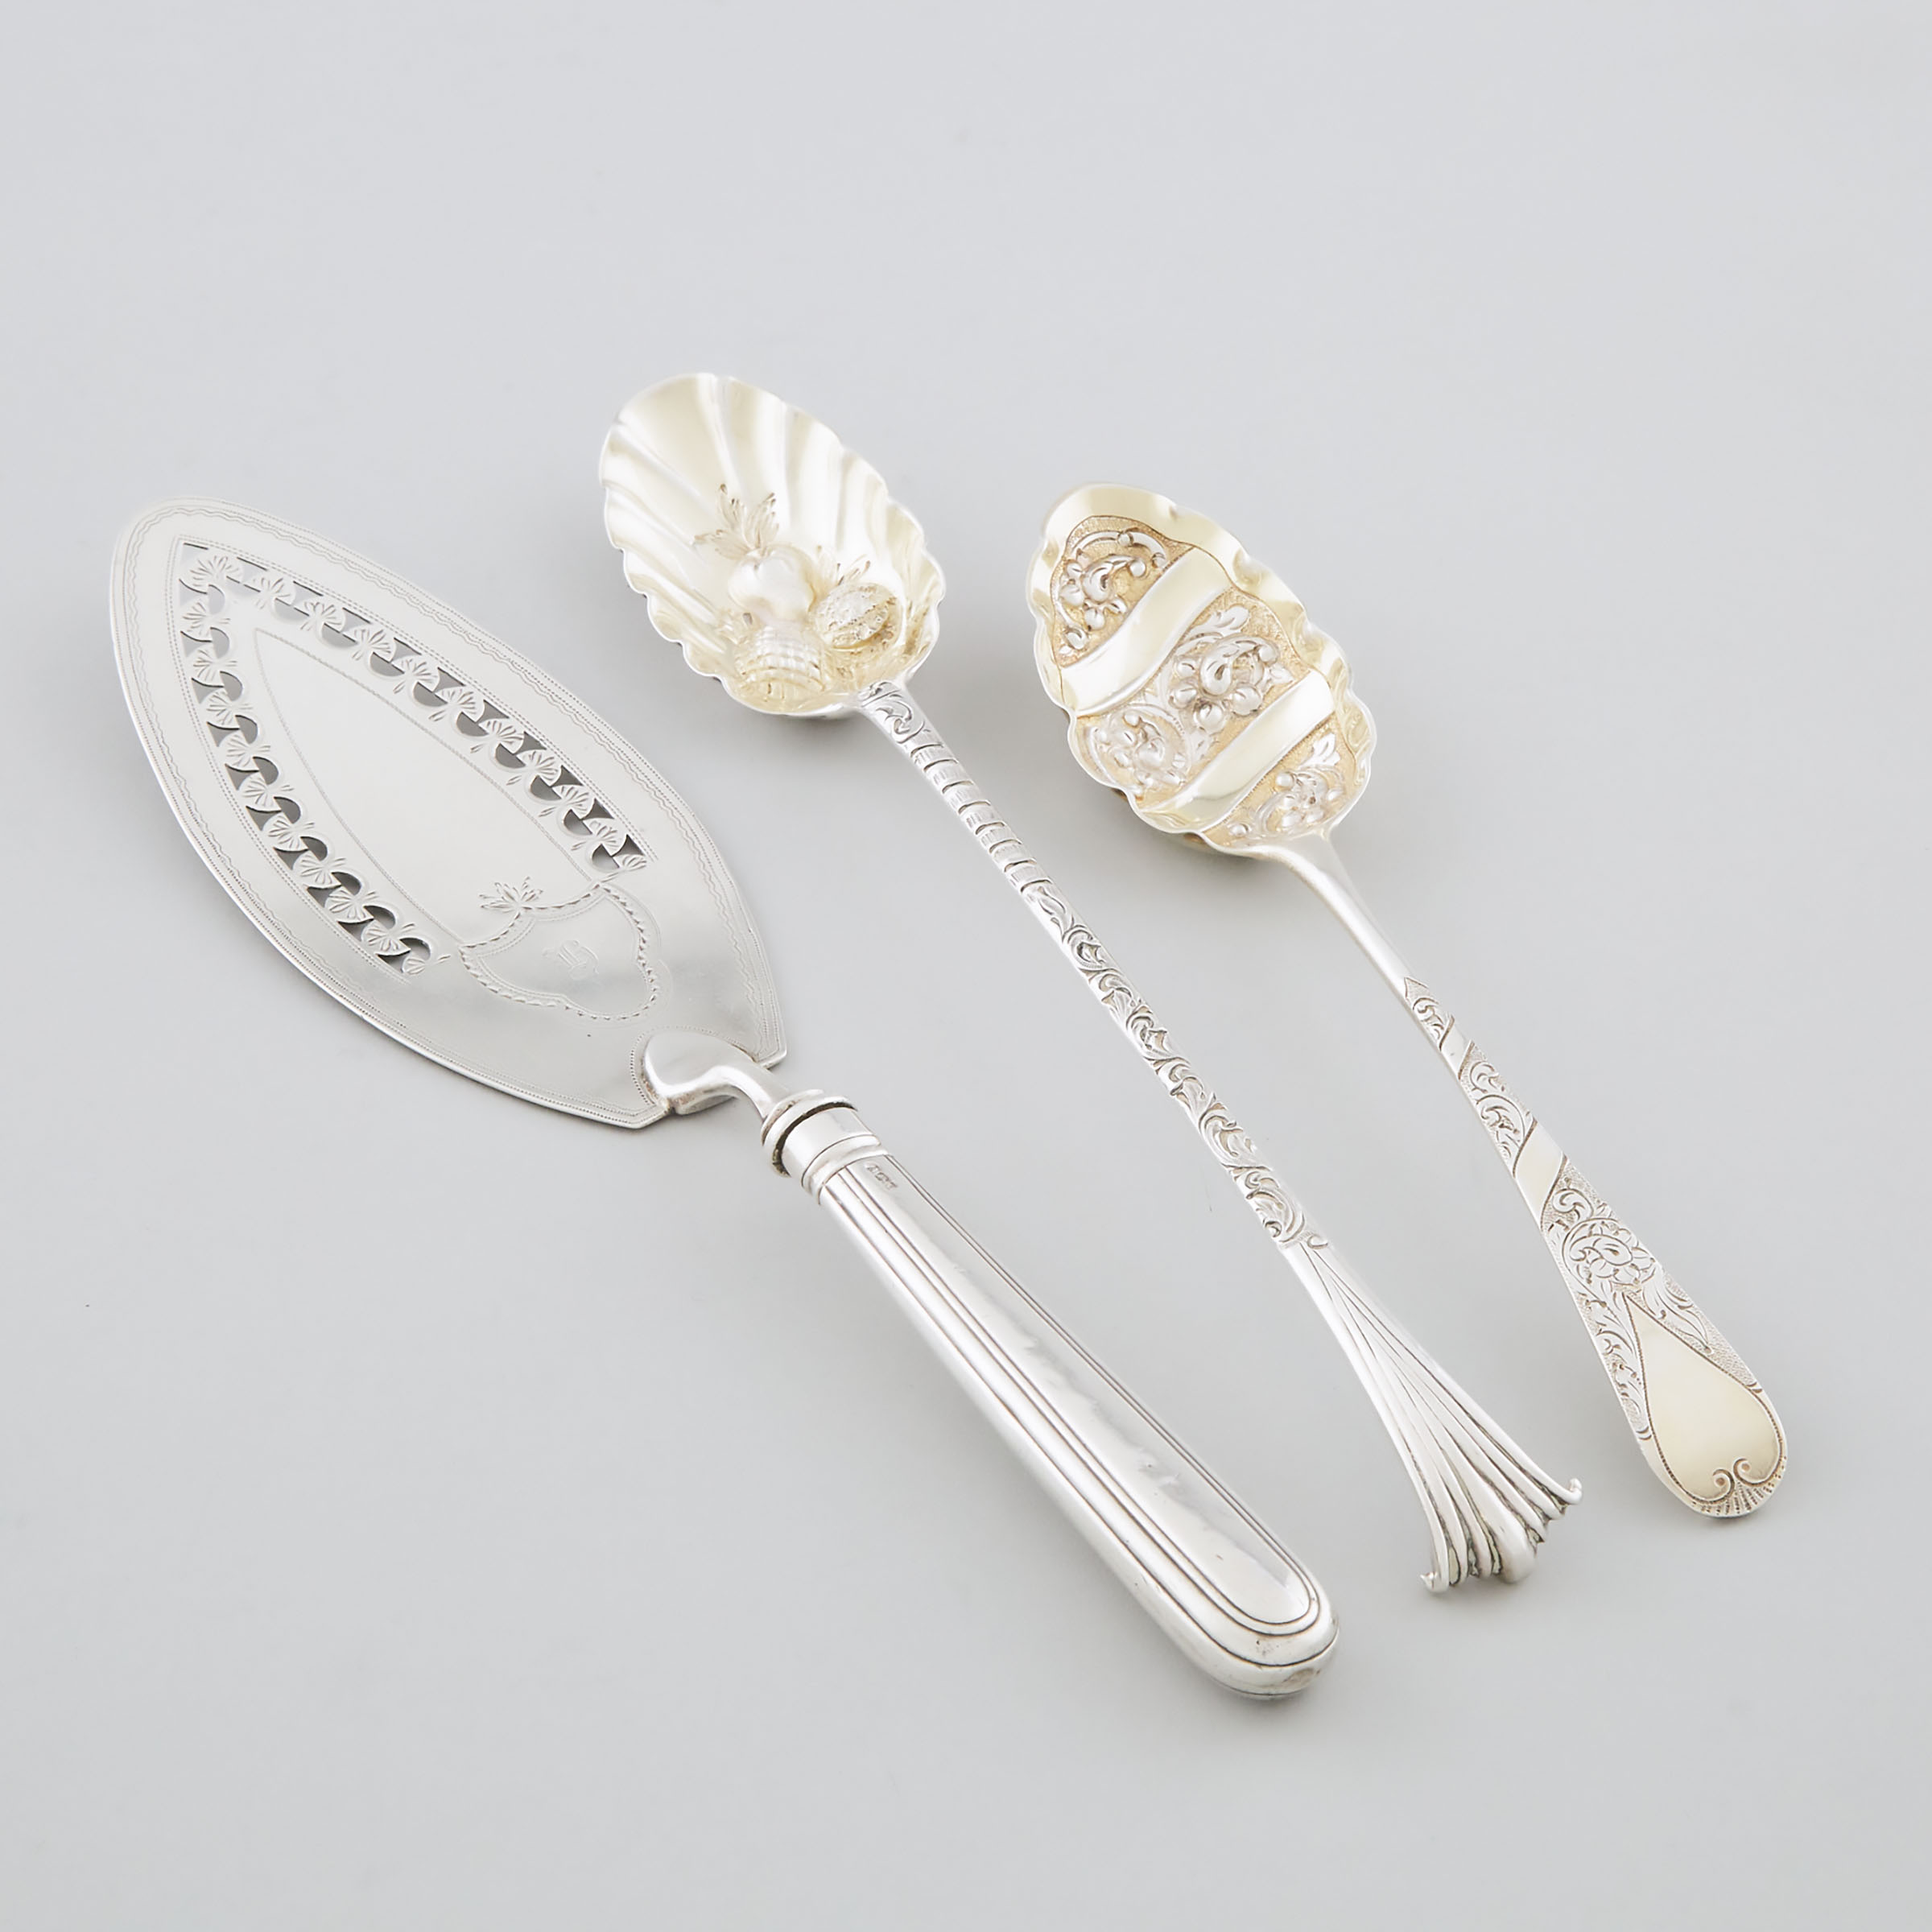 George III Silver Fish Slice and Two Berry Spoons, London, 1764-99